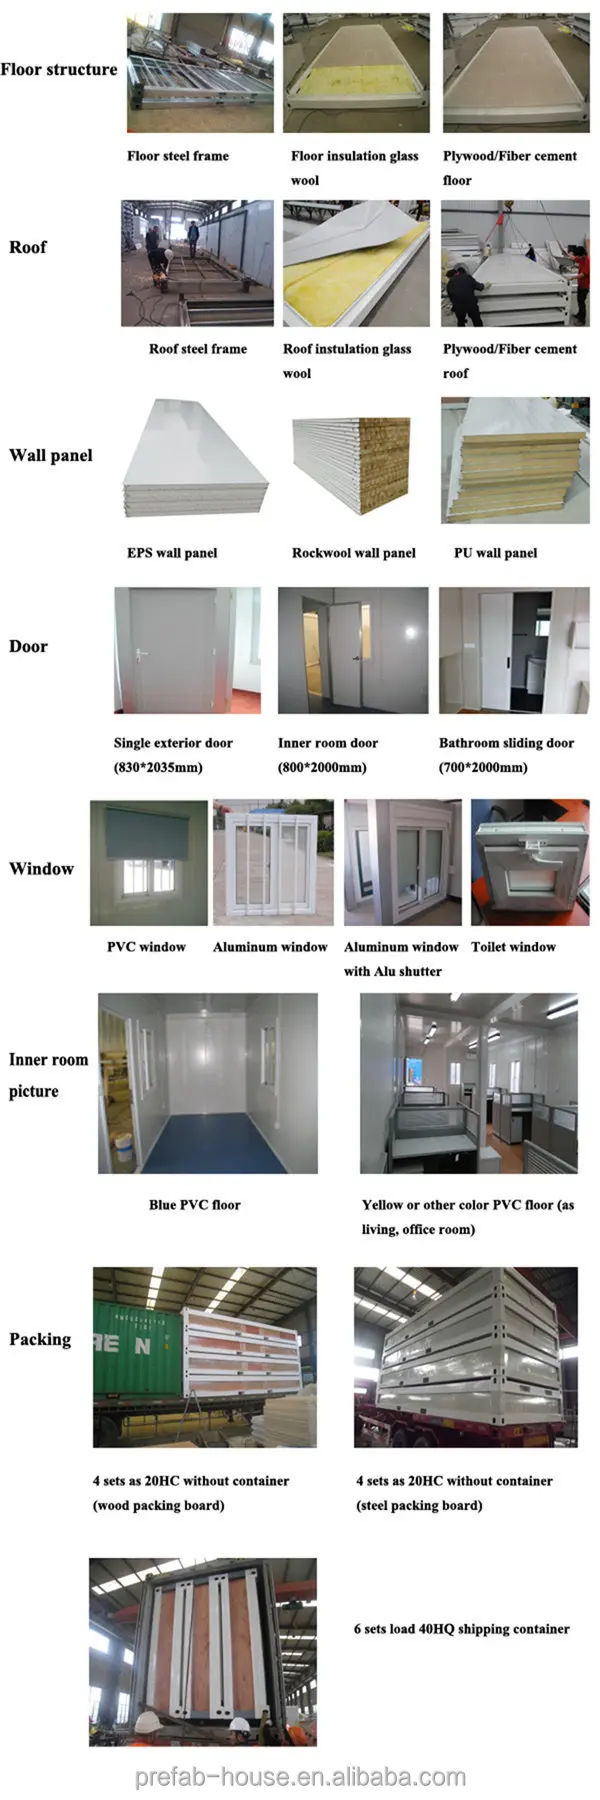 Lida Group homes made out of metal containers Suppliers used as office, meeting room, dormitory, shop-8